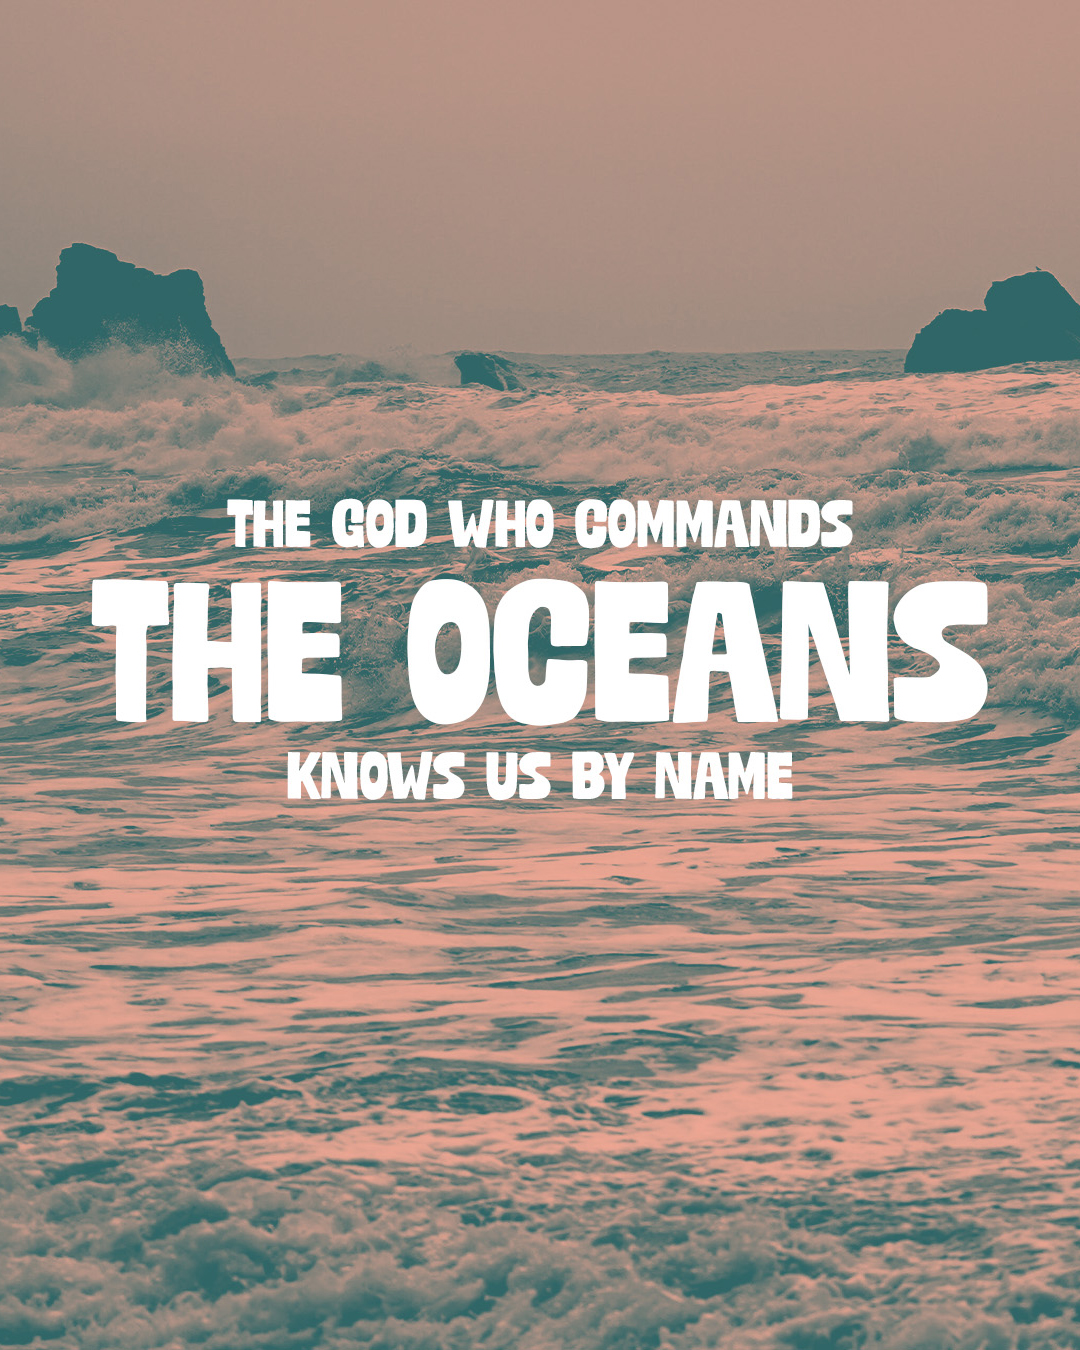 the God who commands the oceans knows us by name